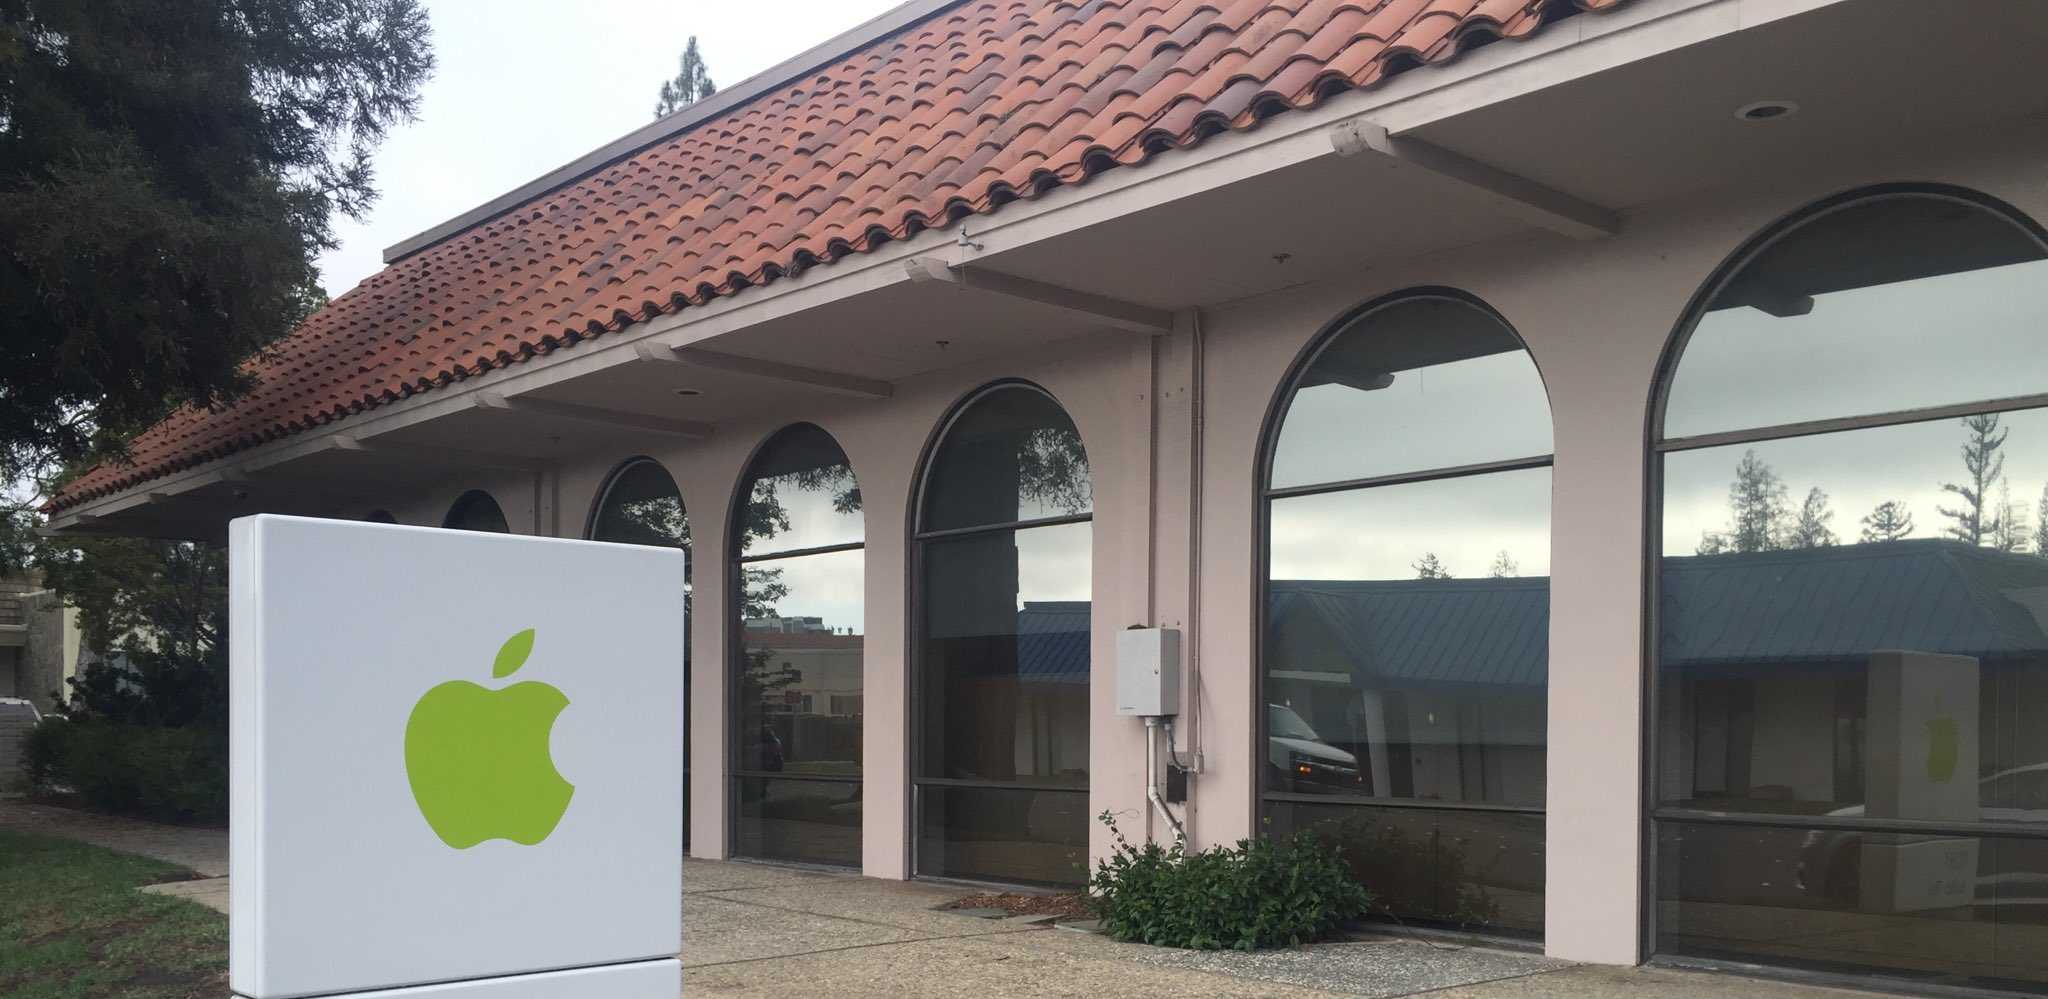 Thieves smashed a window to break into this Apple building.